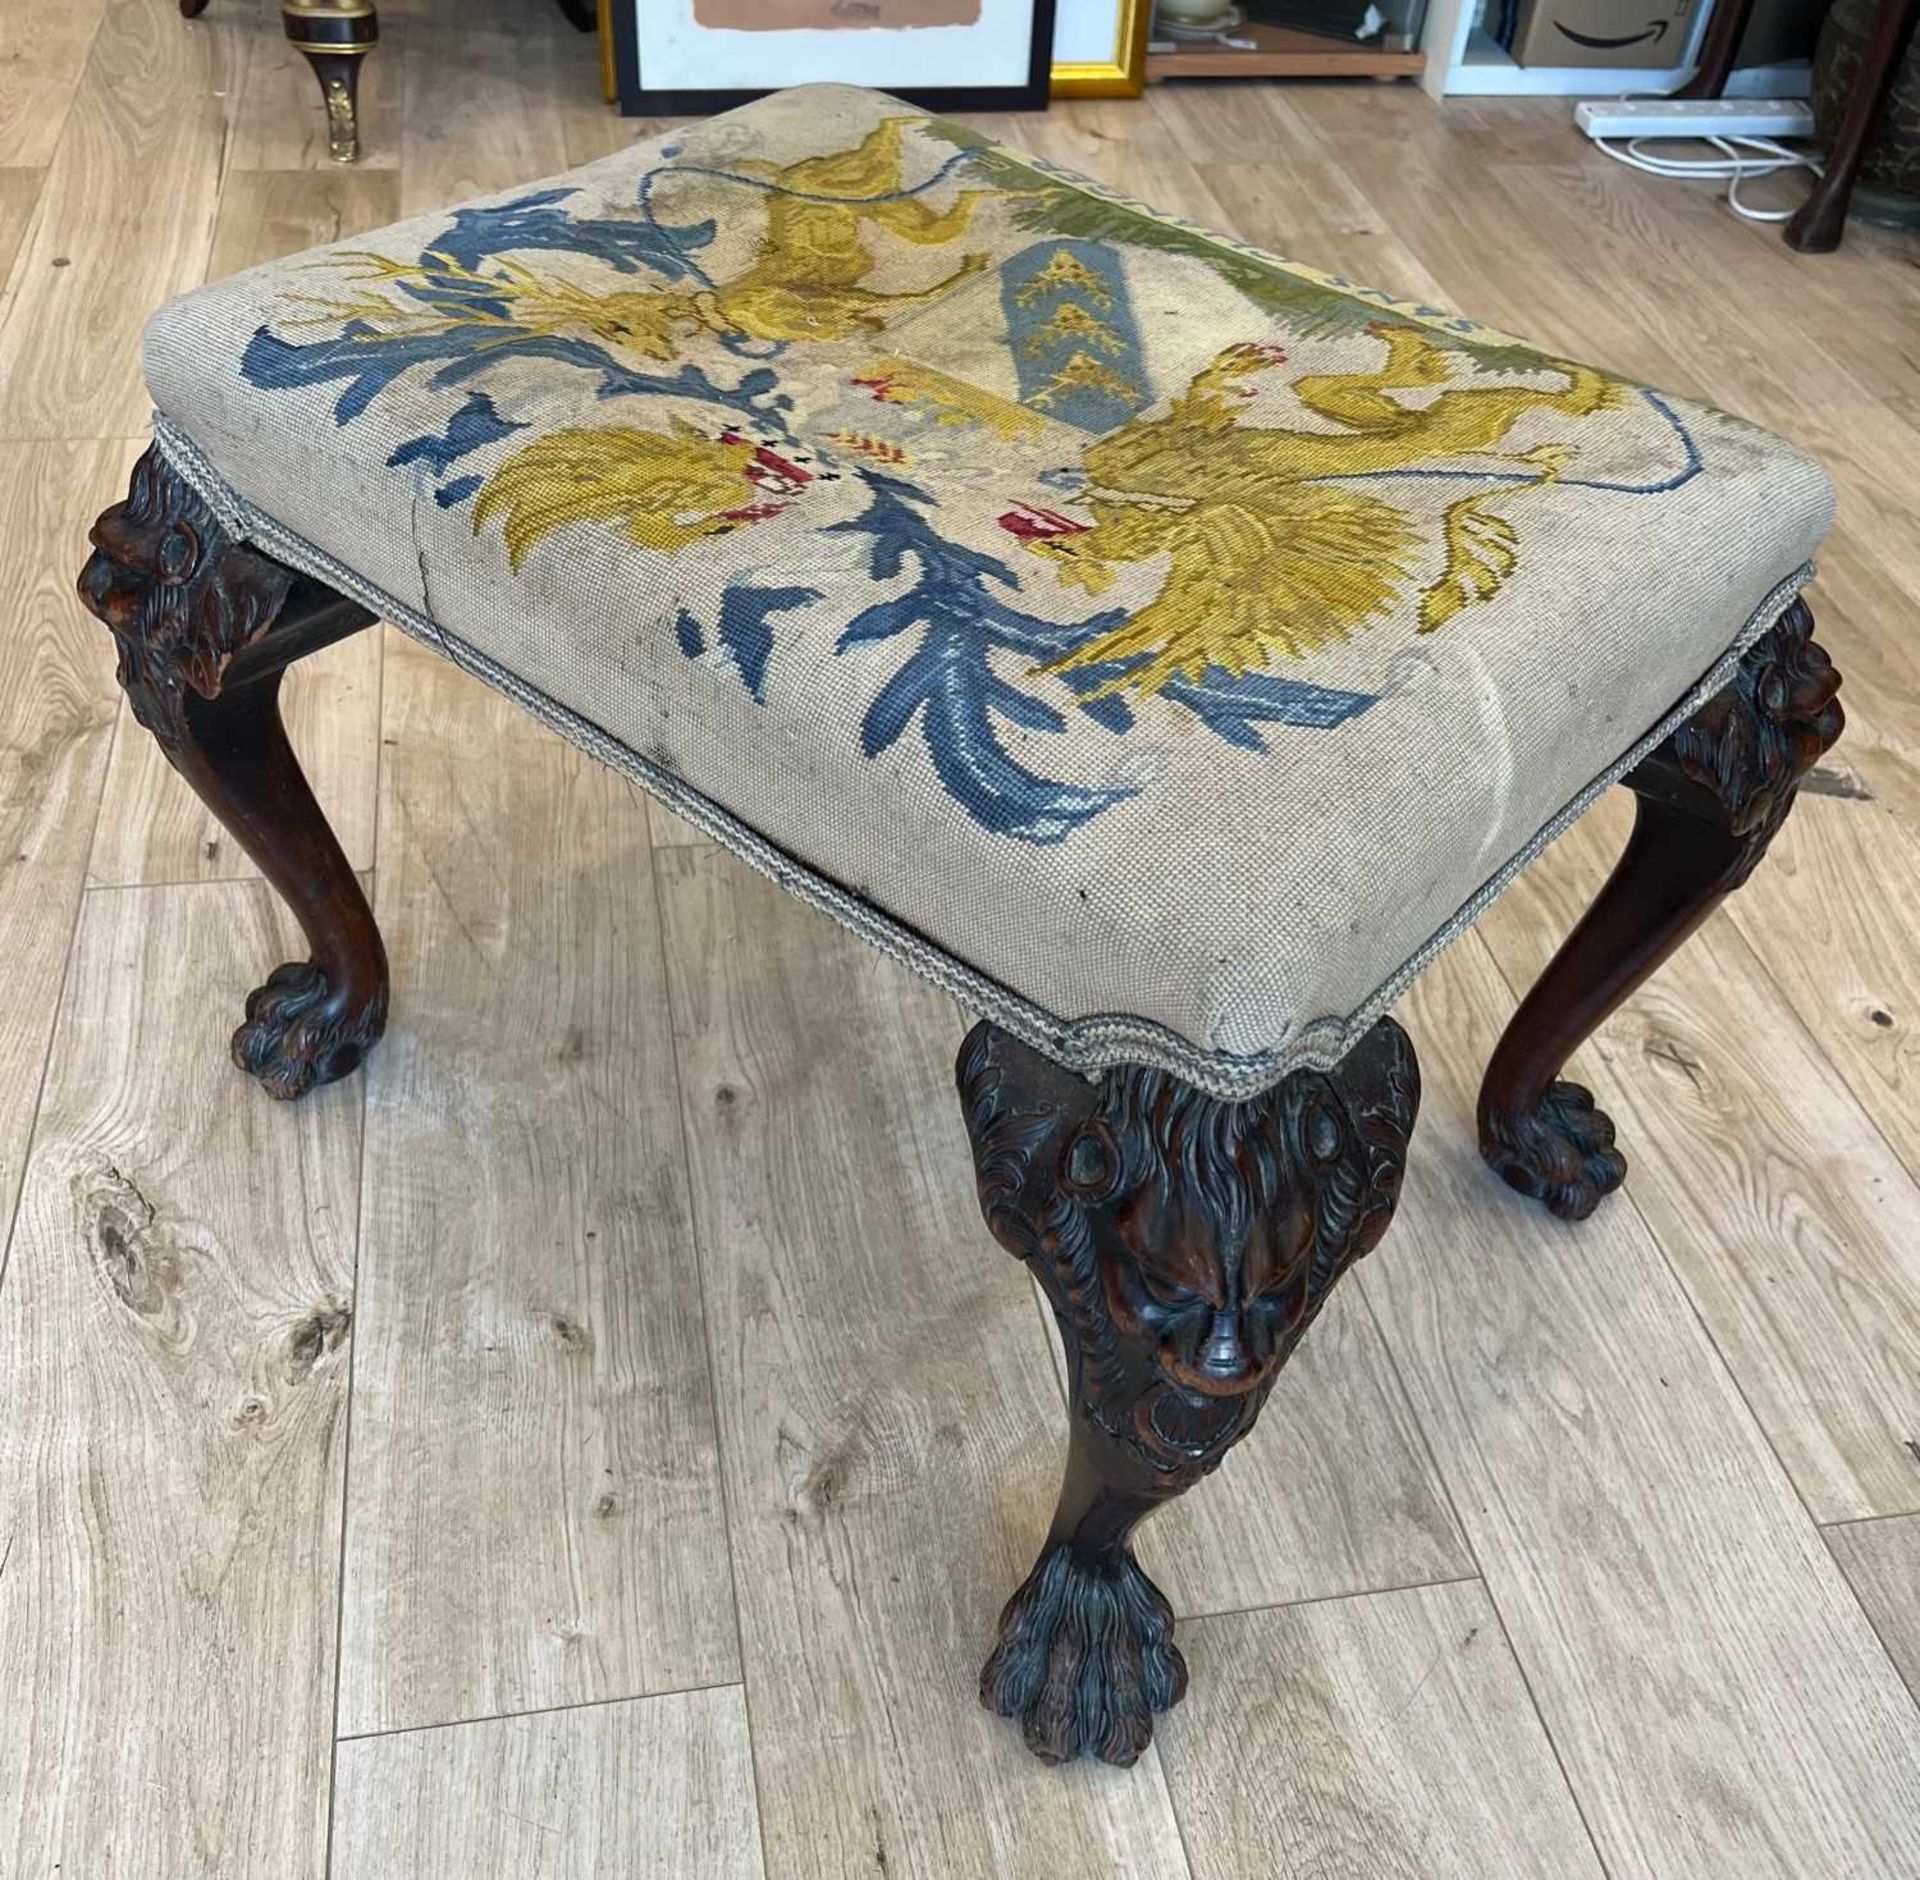 A 19TH CENTURY IRISH MAHOGANY FOOTSTOOL WITH THE ARMS OF THE EARLY OF DERBY - Image 5 of 10